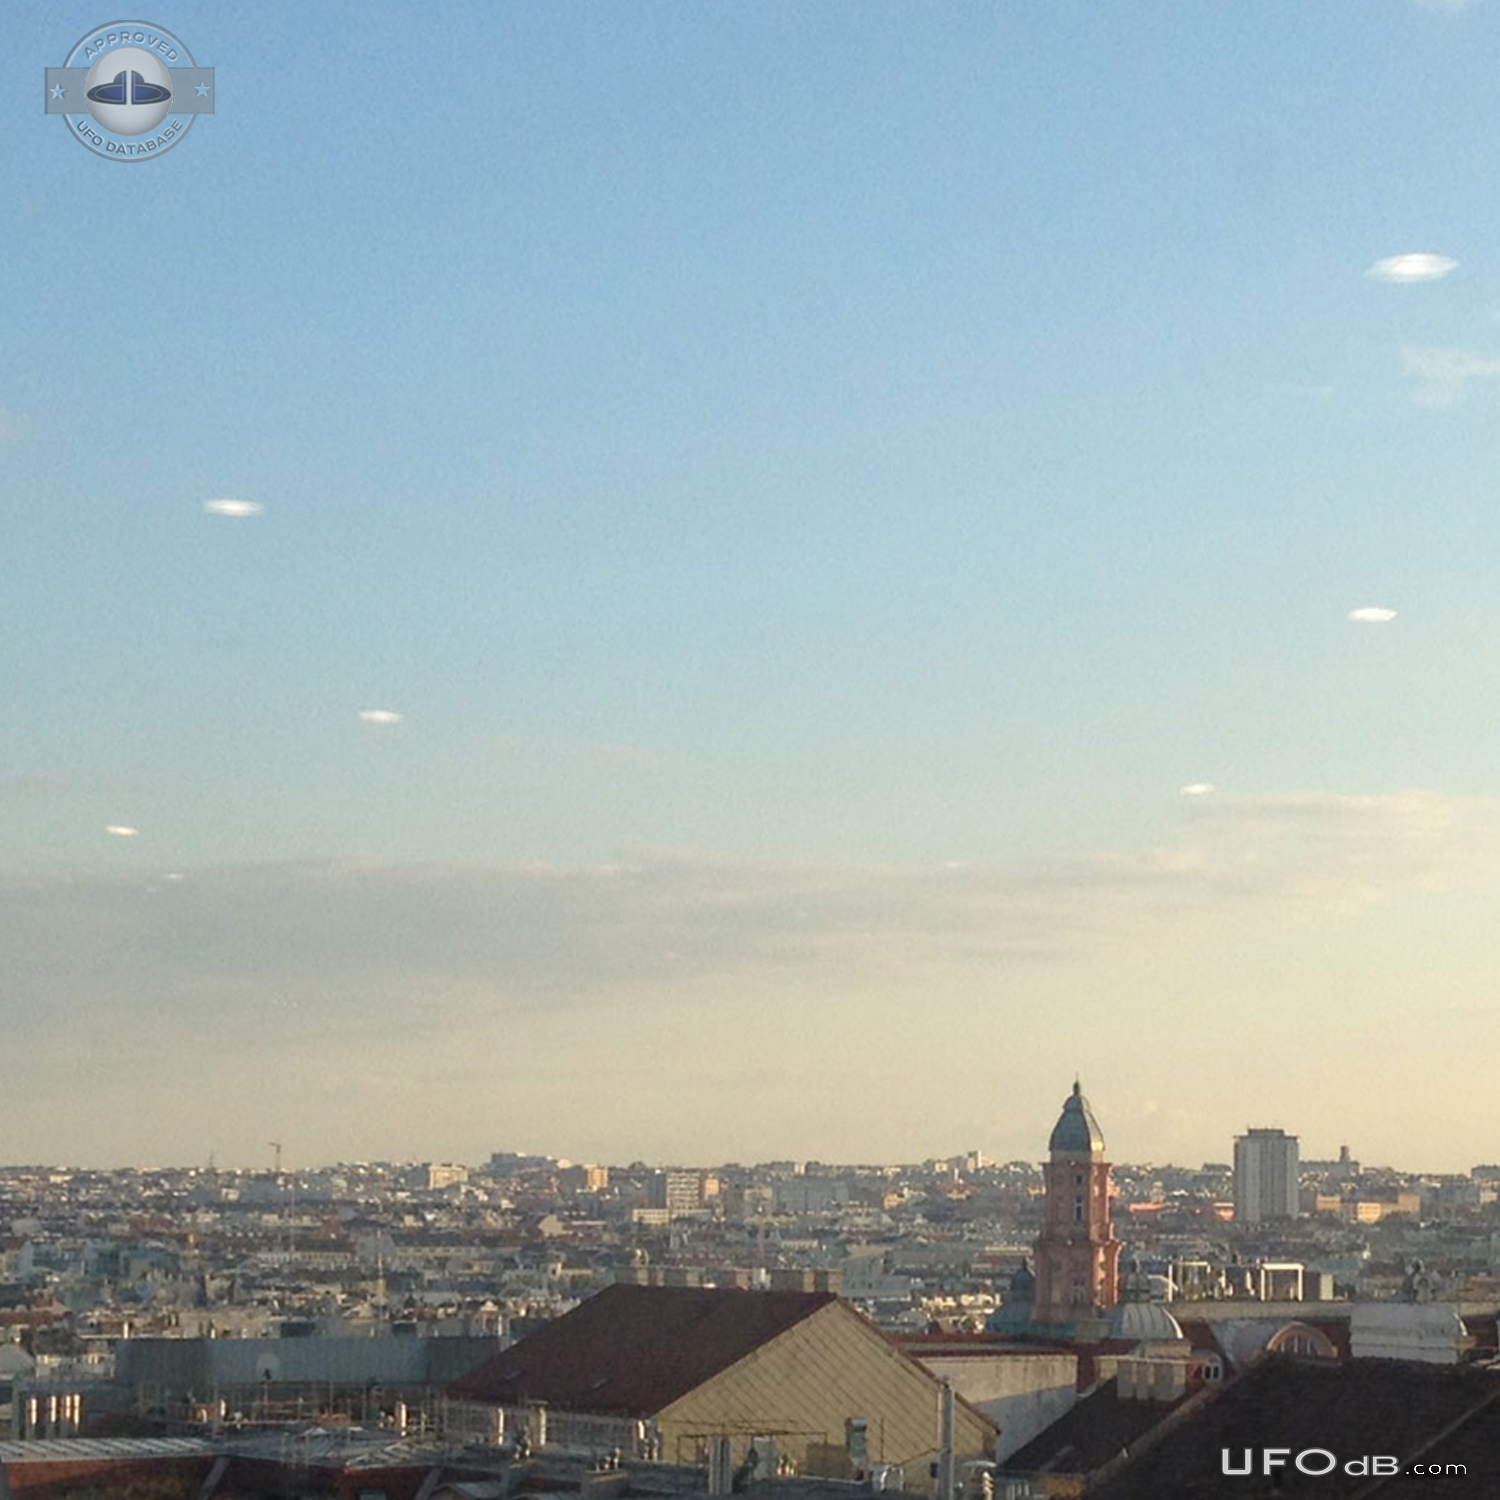 Strange formation of UFOs saucers over Vienna, Austria - October 2015 UFO Picture #741-3